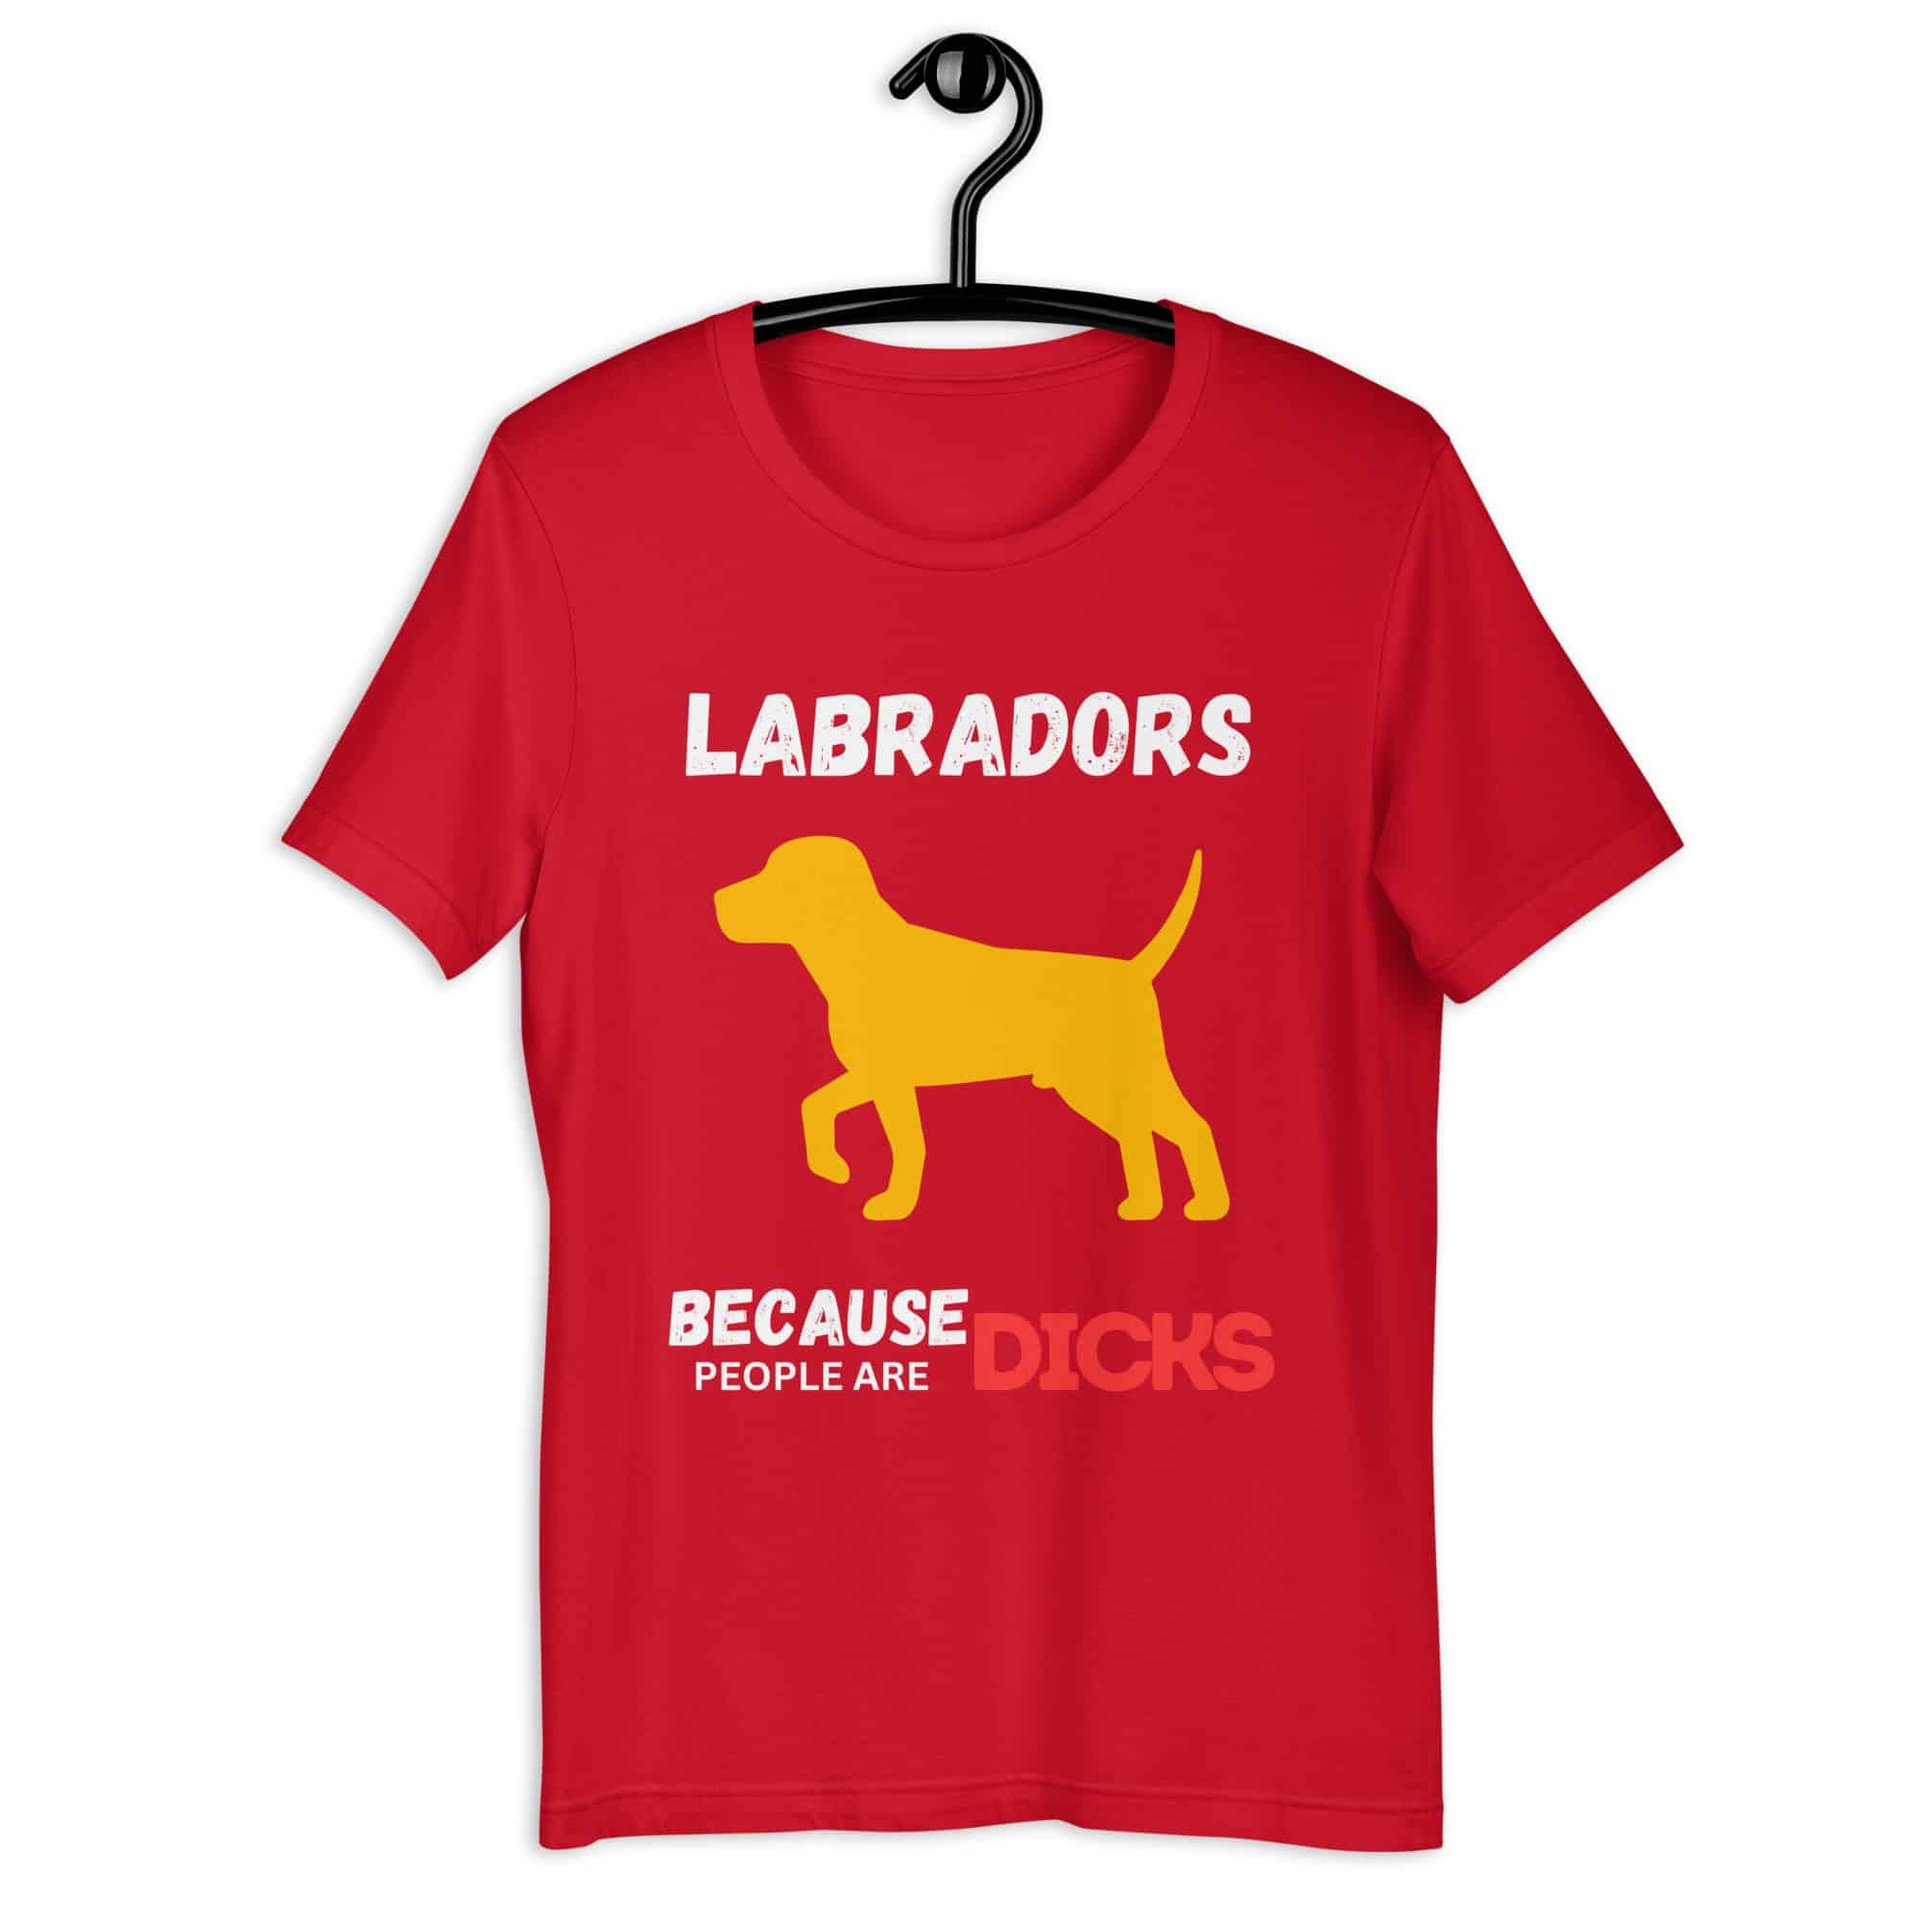 Labrador Because People Are Dicks Unisex T-Shirt Red